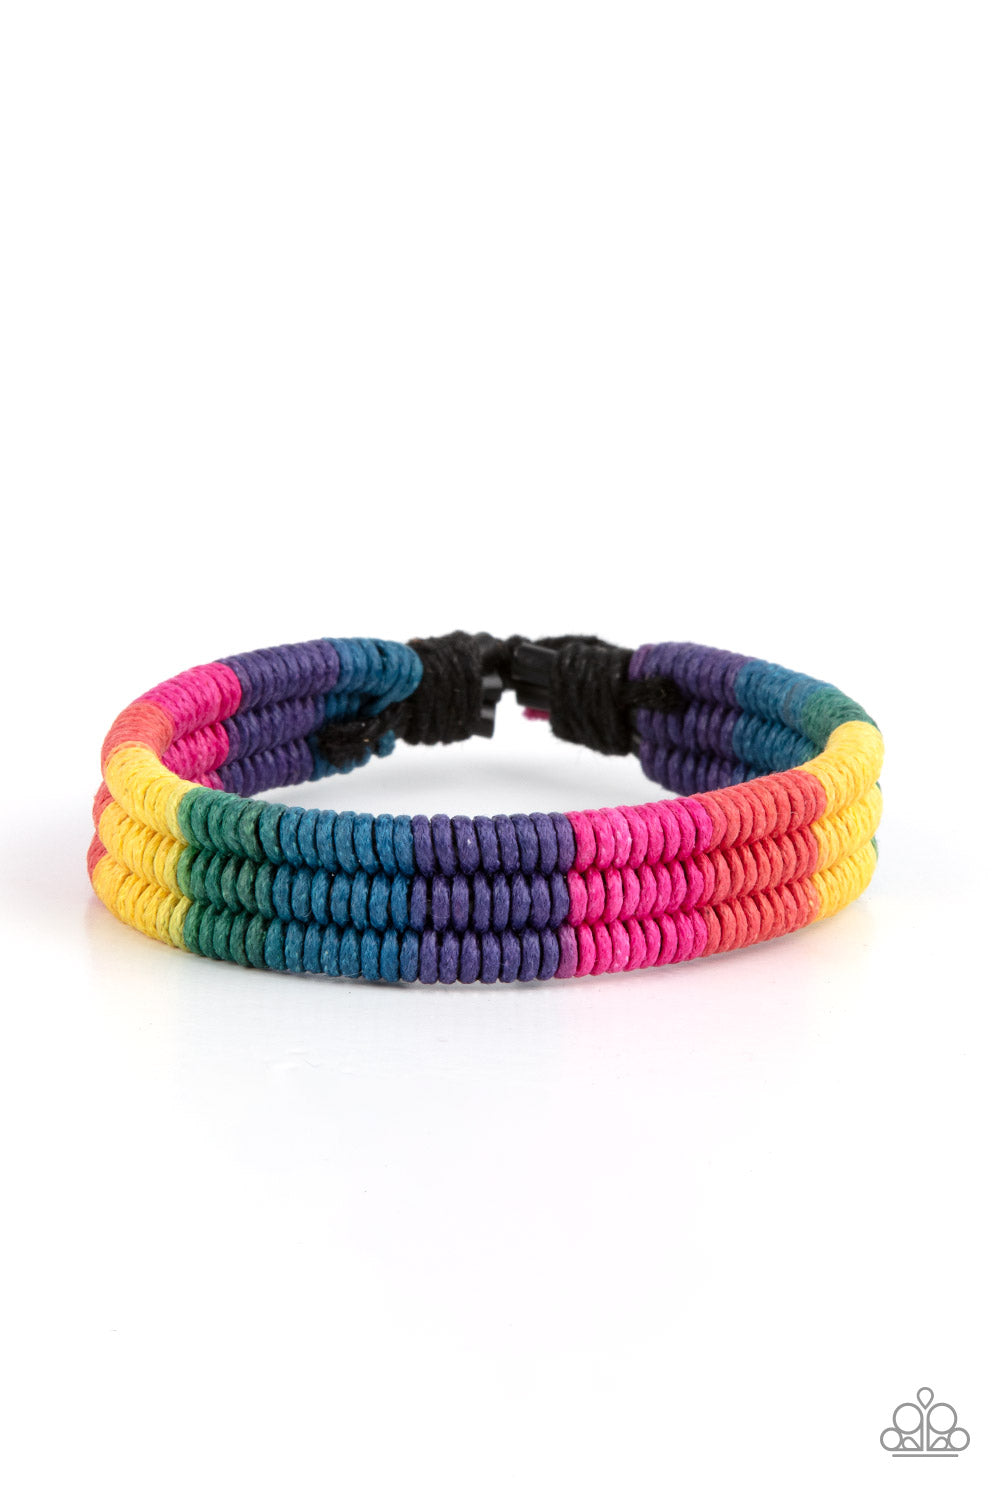 Rainbow Renegade Multi Bracelet - Paparazzi Accessories  Colorful sections of pink, red, yellow, green, blue, and purple cords ornately wrap and weave around three black bands, coalescing into a radiant rainbow around the wrist. Features an adjustable sliding knot closure.  Sold as one individual bracelet.